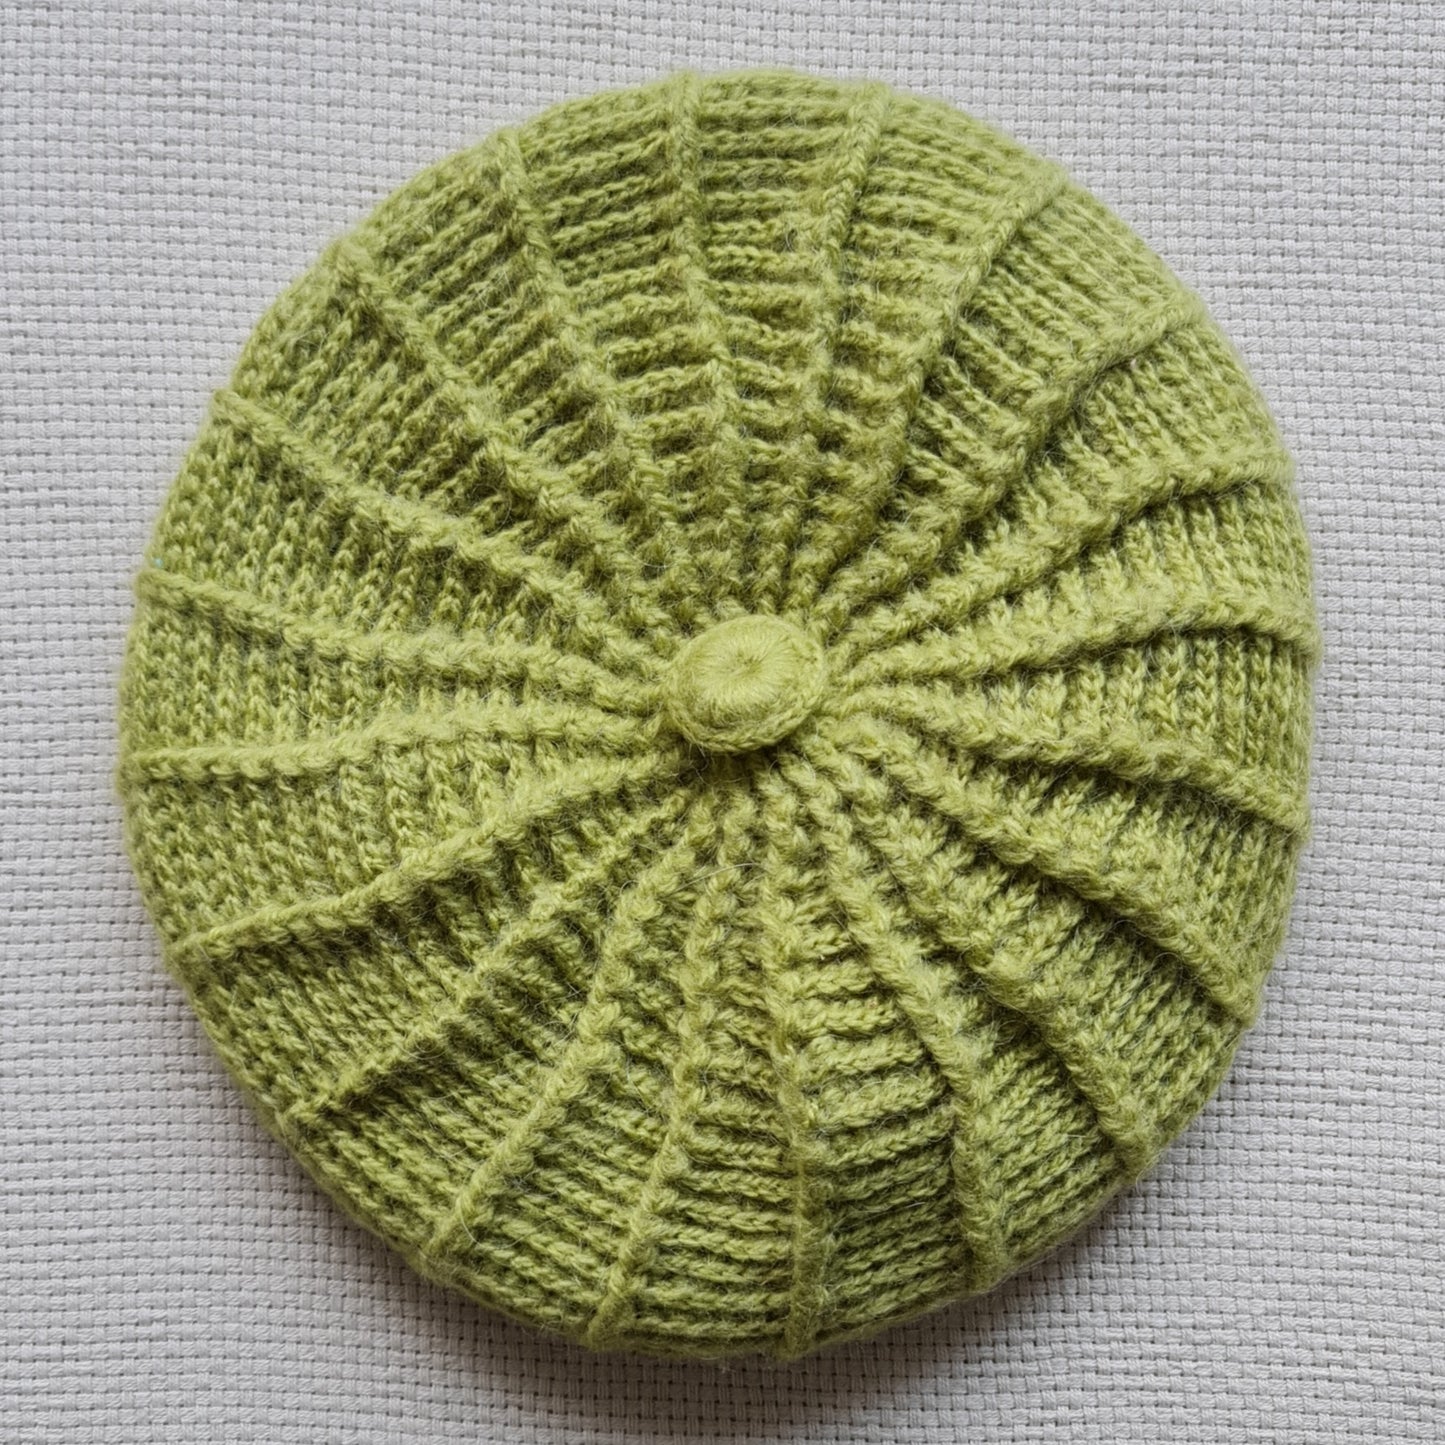 Green knitted women's beret with decorative edge and center (LEPU 18) 